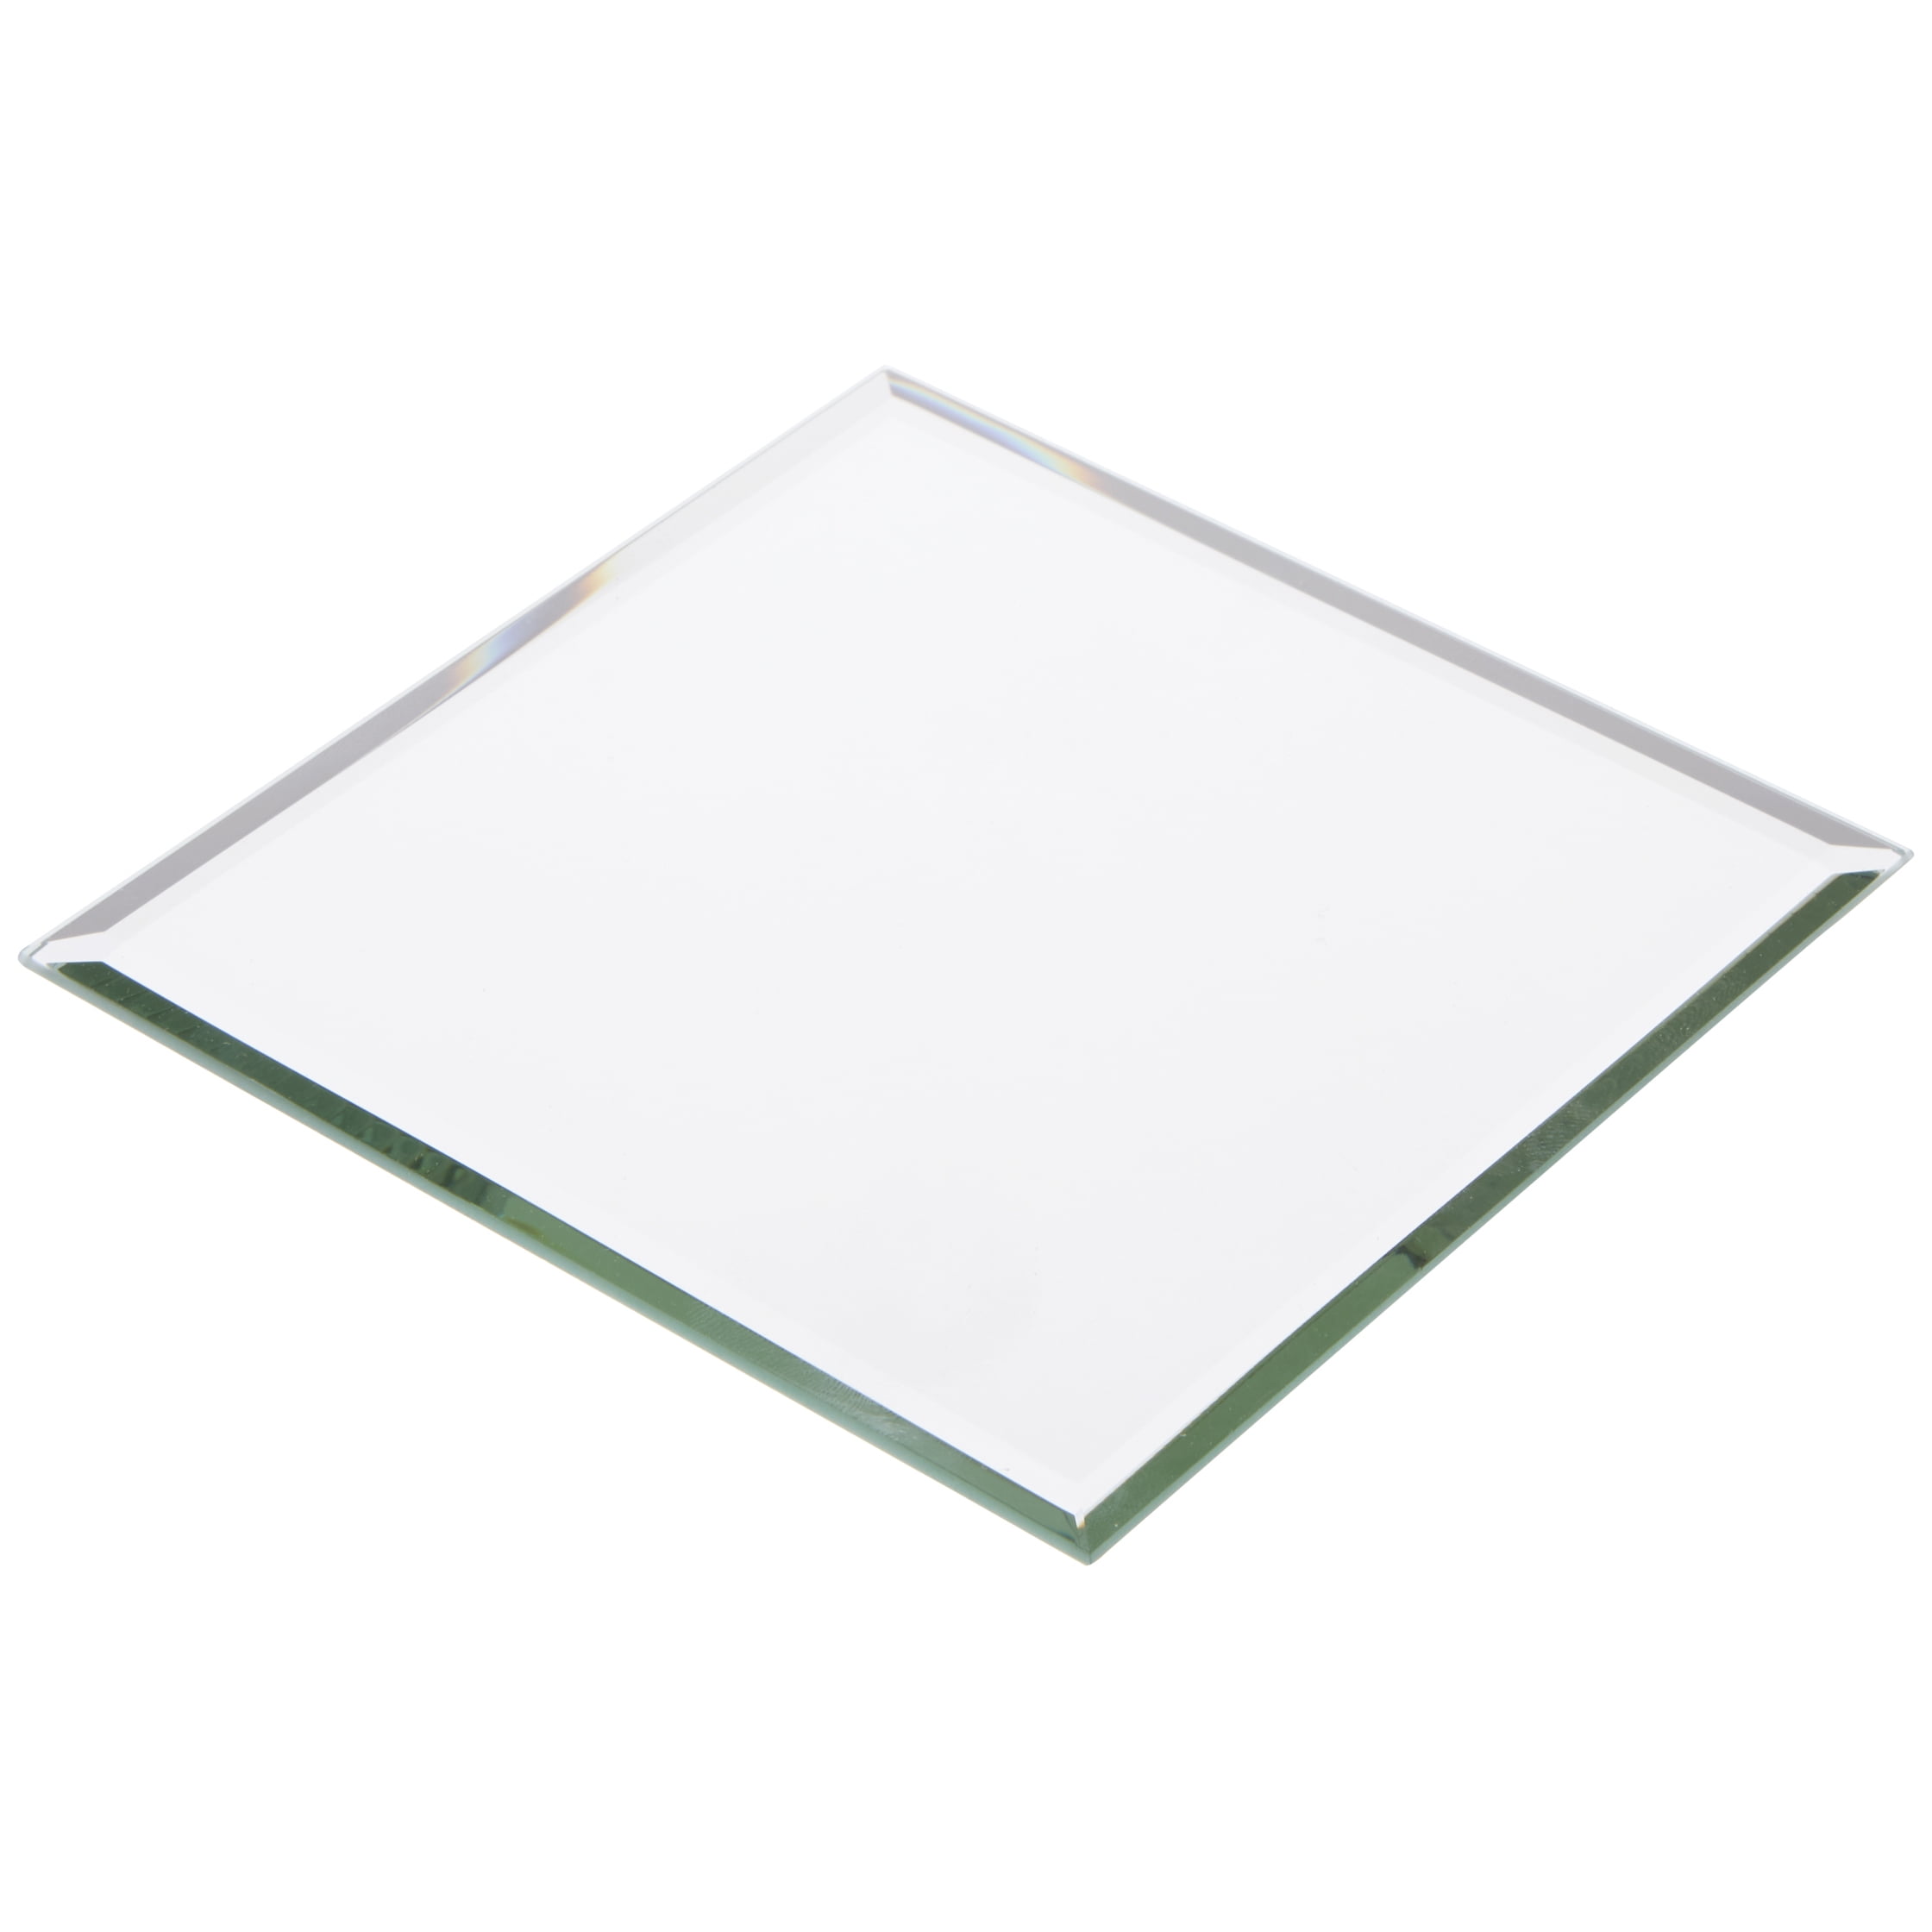 2 inch x 2 inch Pack of 12 Plymor Square 3mm Beveled Glass Mirror 